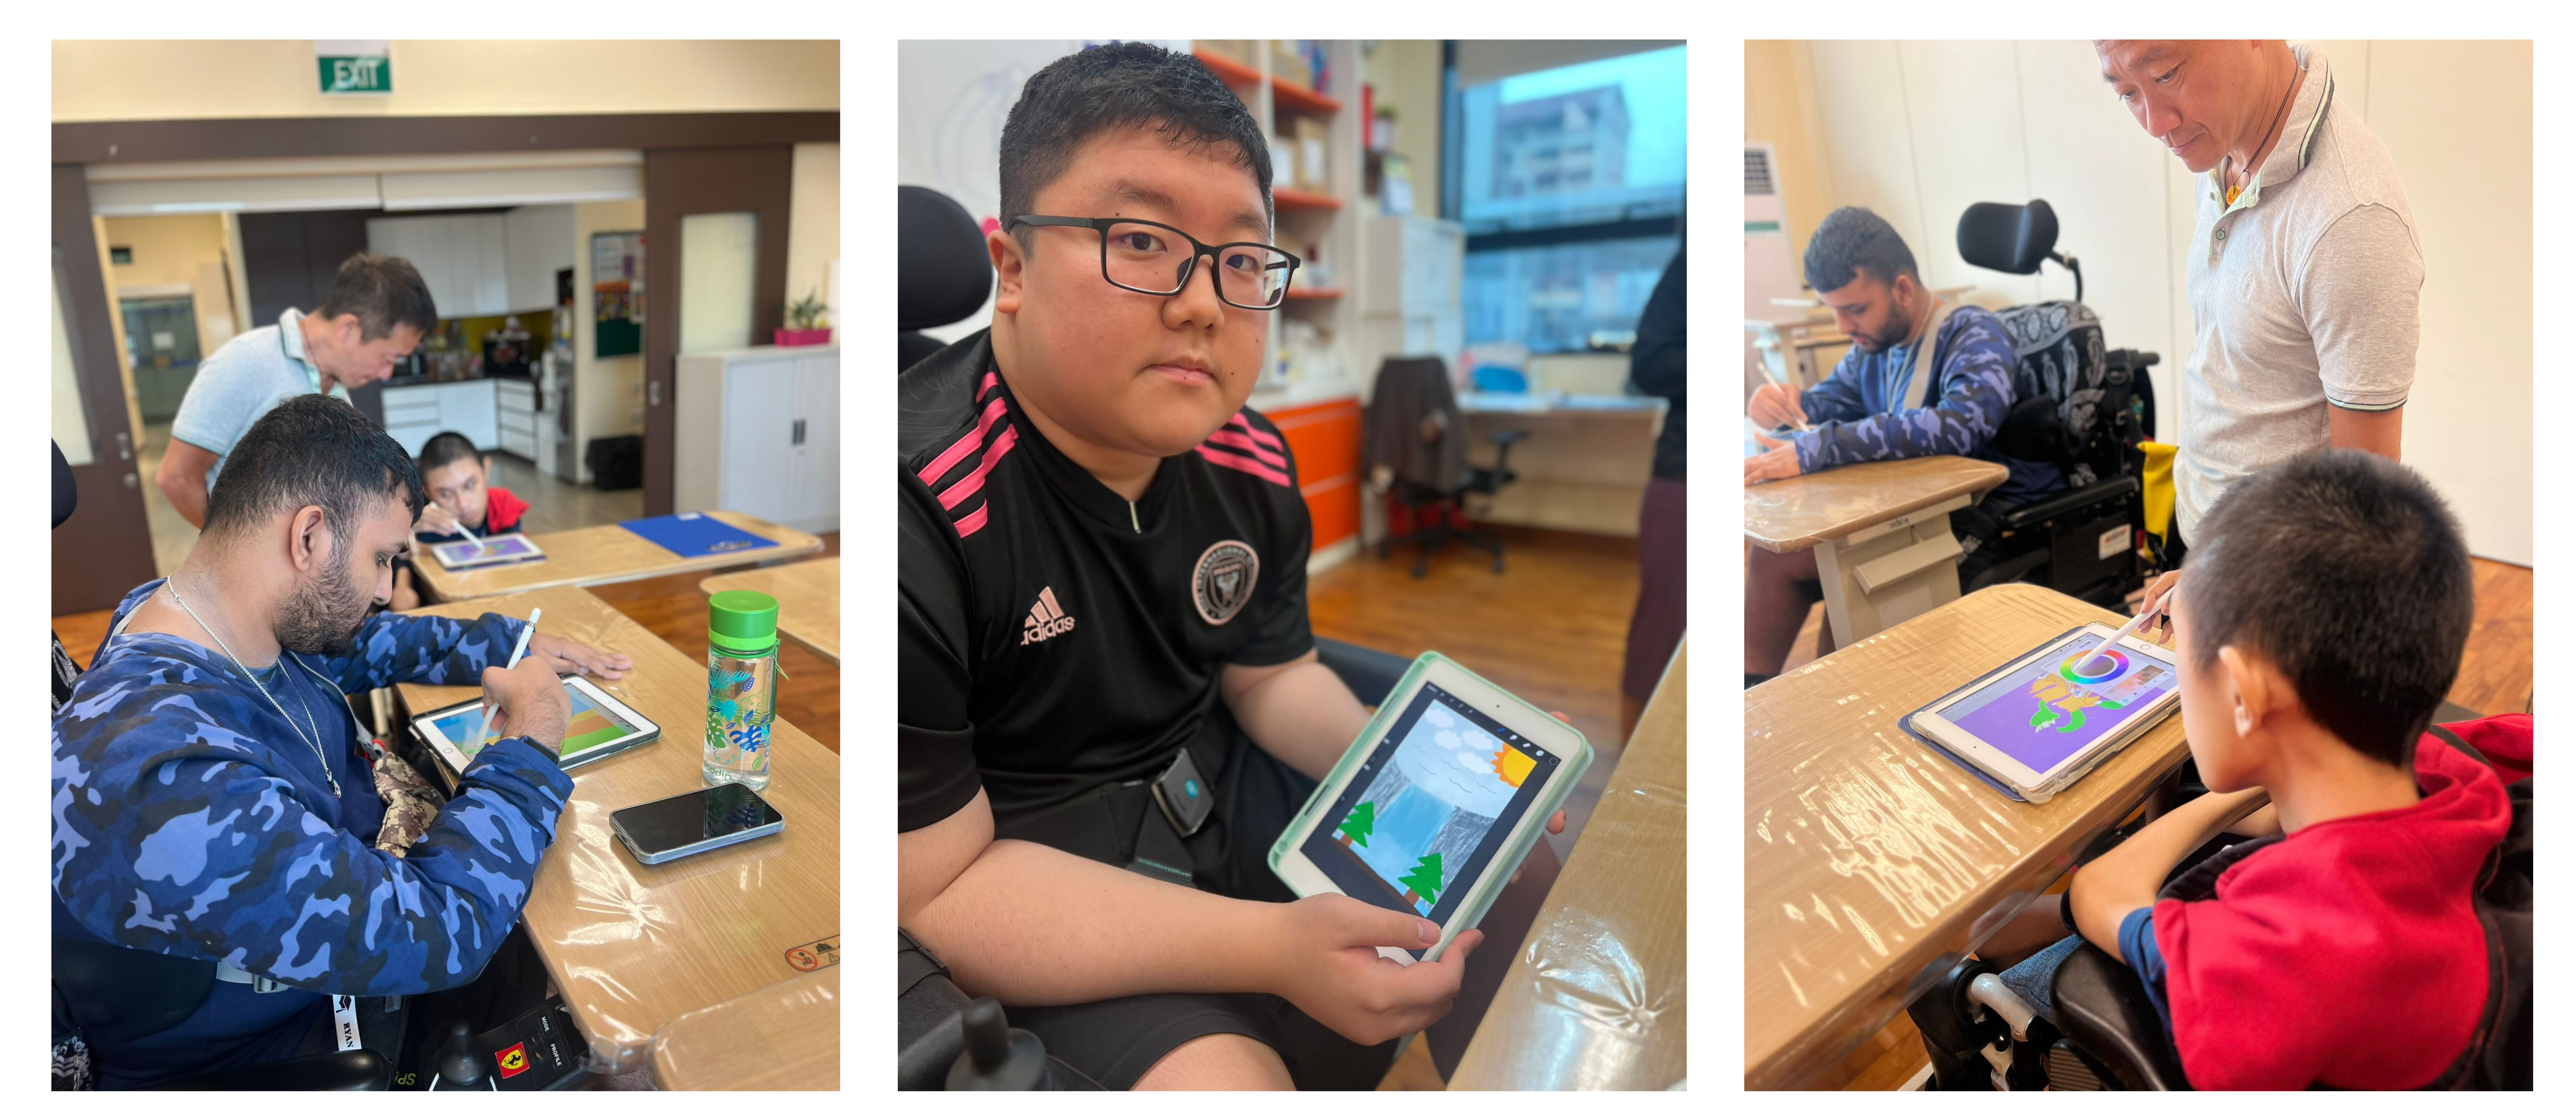 Compiled images of artists from Muscular Dystrophy Association Singapore drawing on the iPad using an Apple pencil